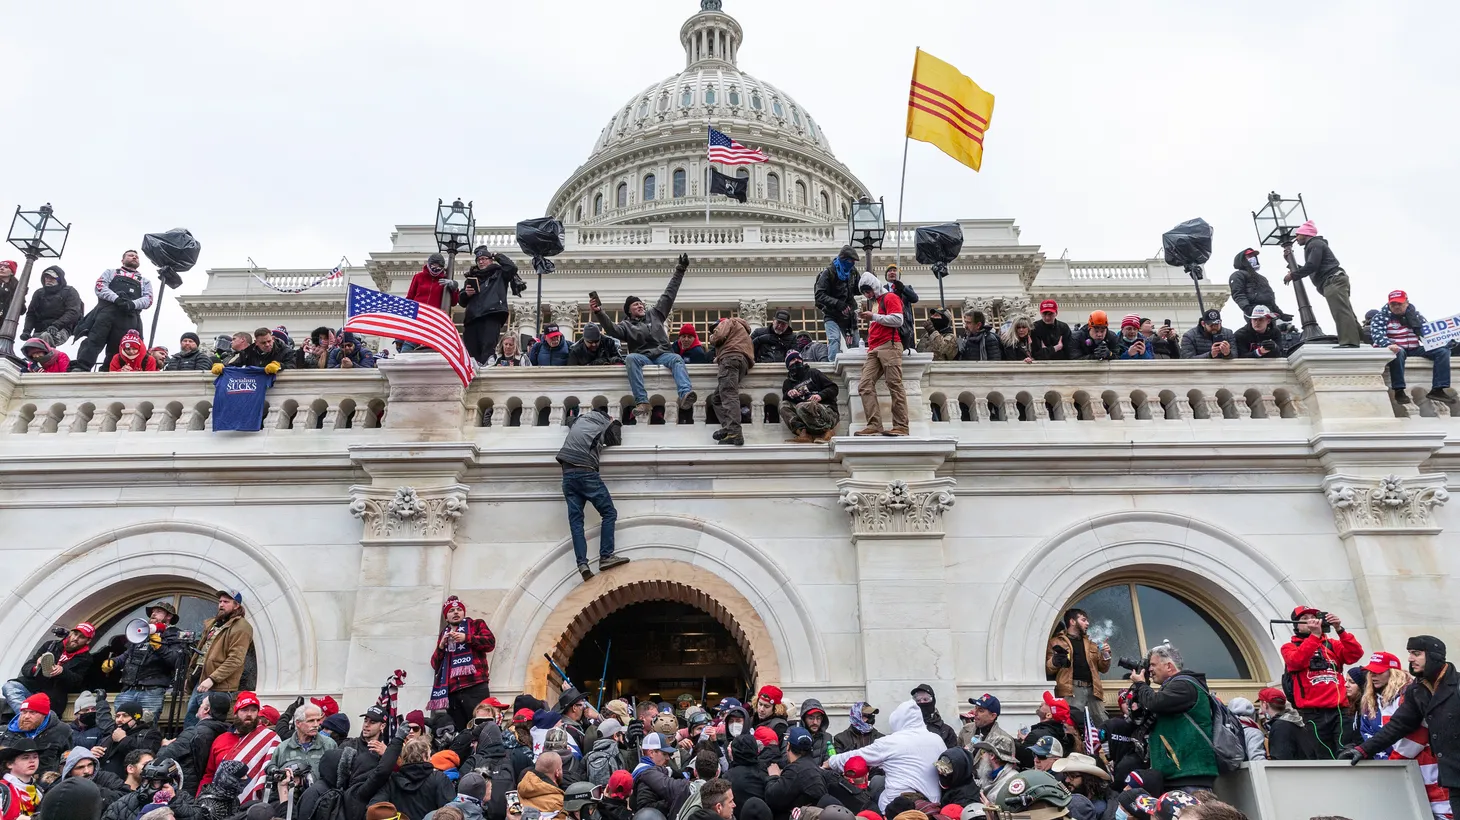 Rioters scale a wall of the U.S. Capitol on January 6, 2021.